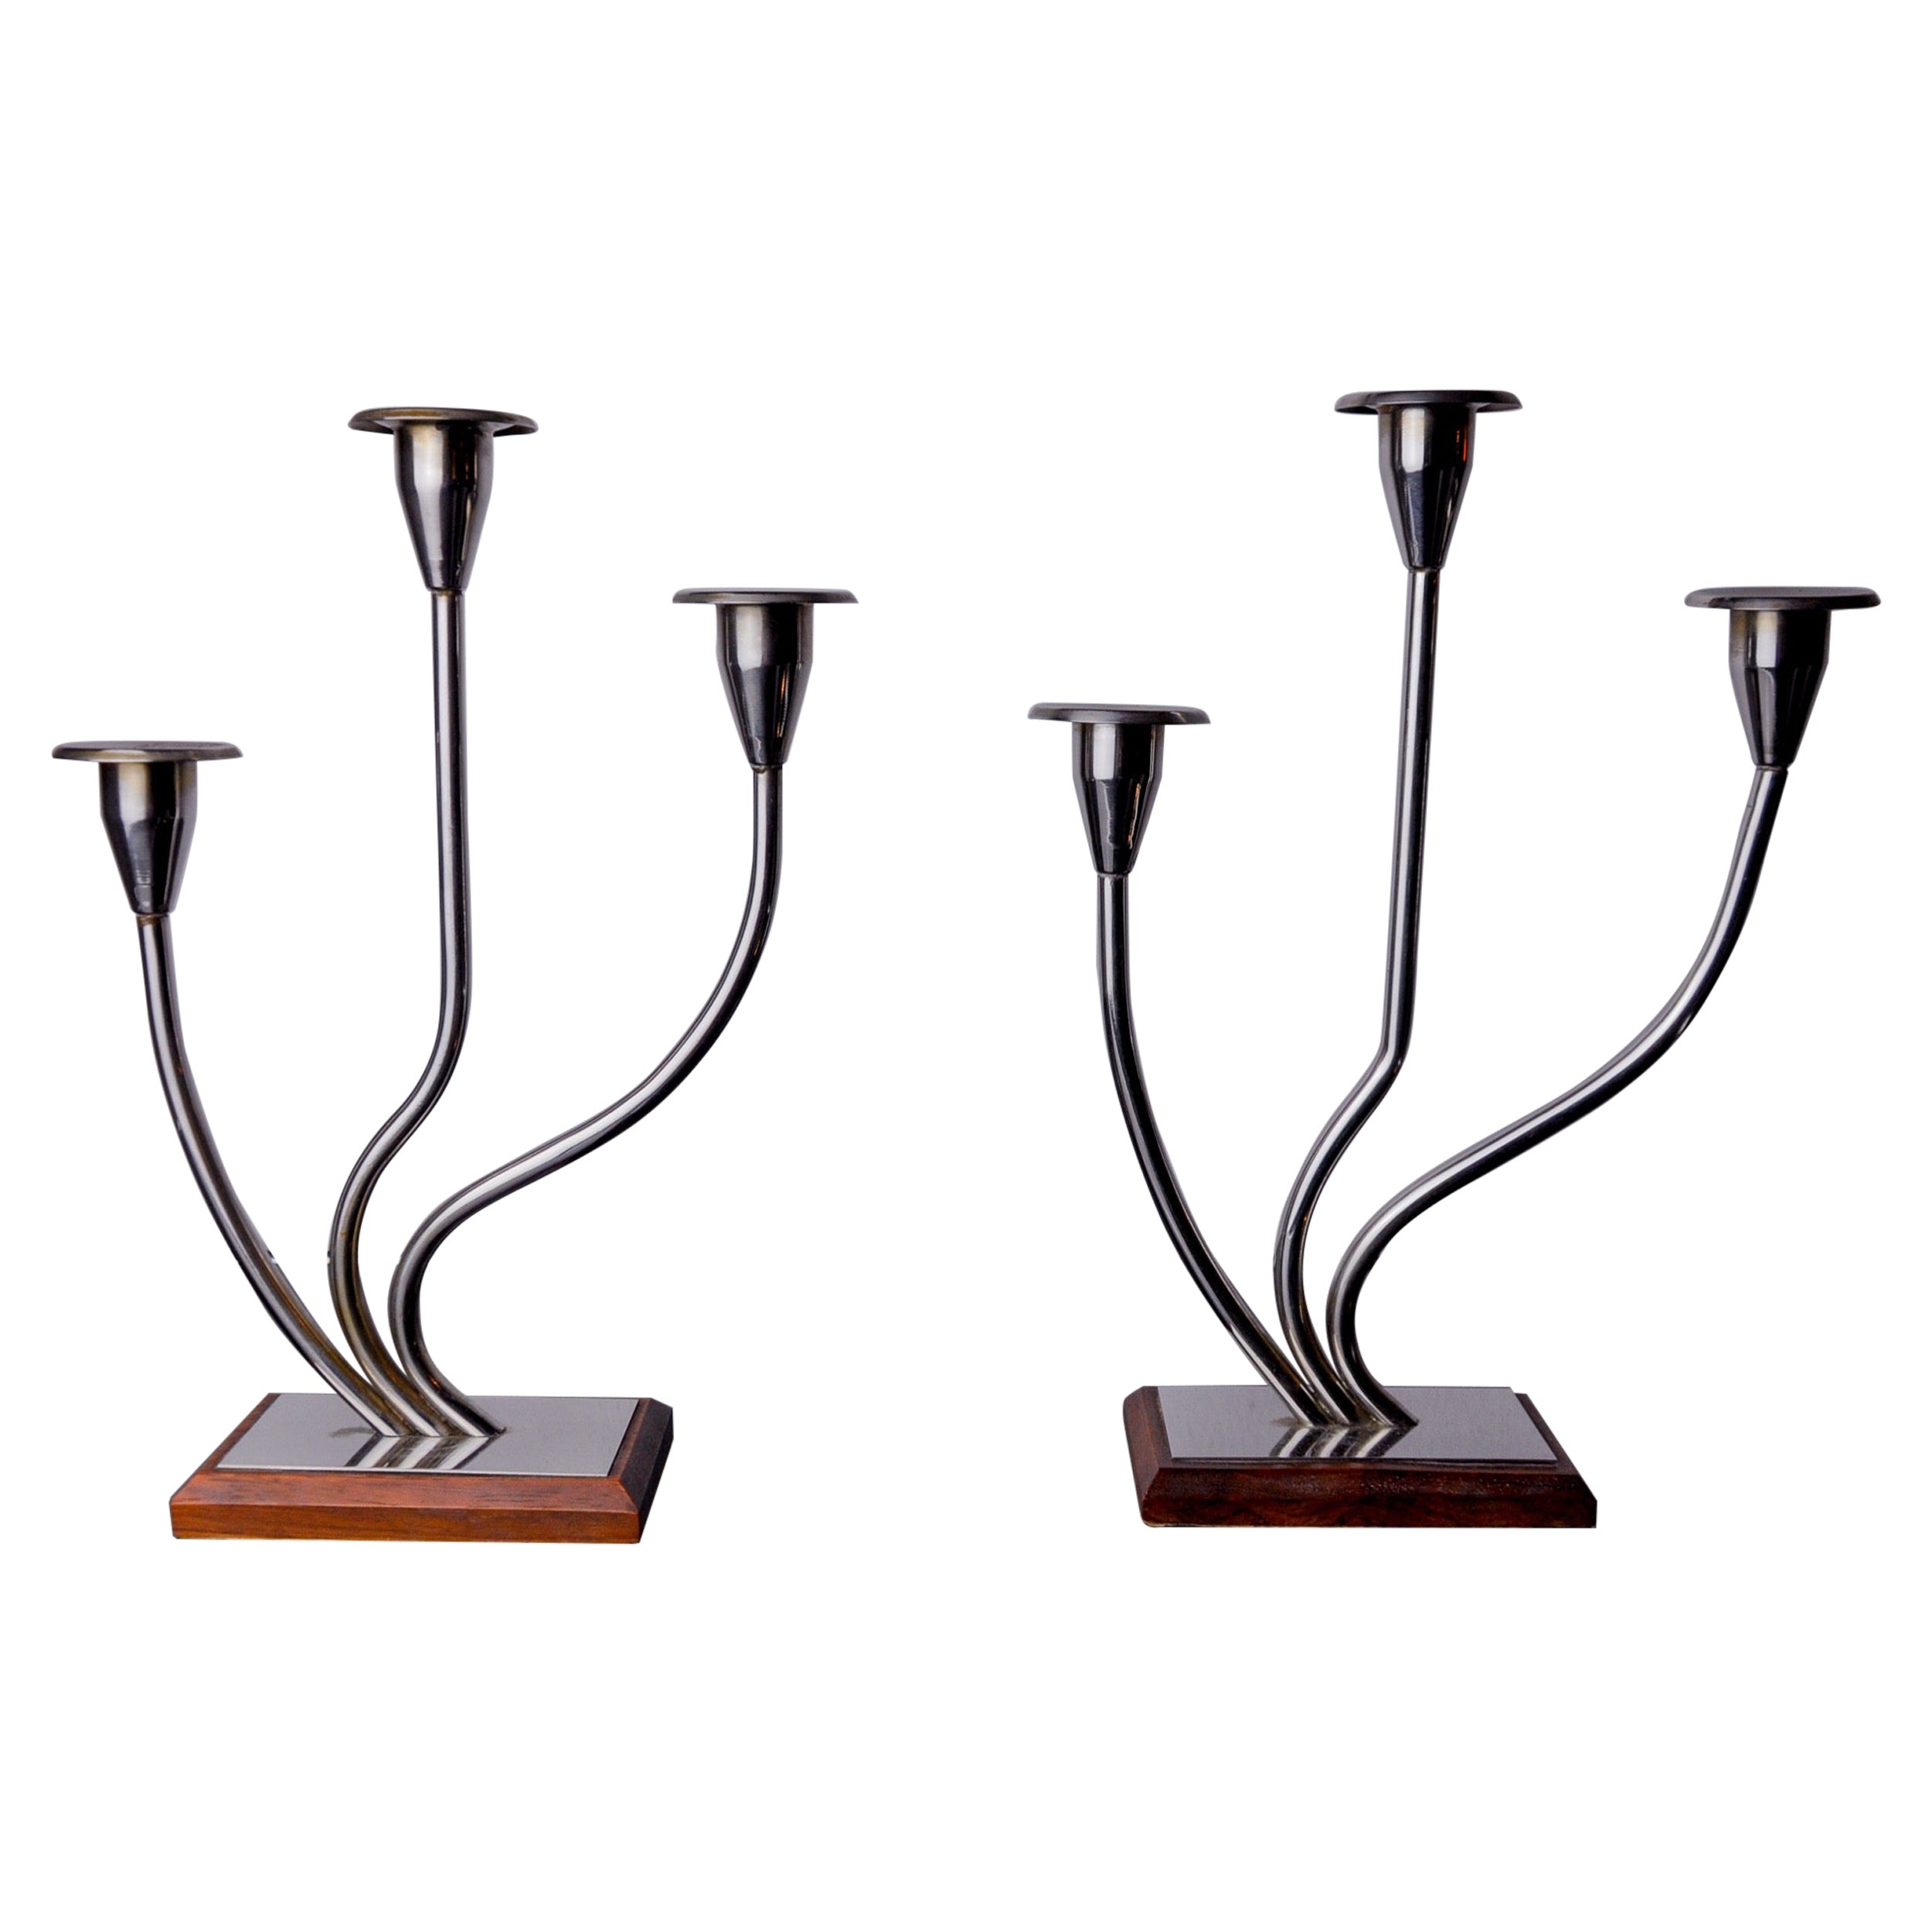 Pair of art deco candlesticks in stainless steel and rosewood 3 flames, Spain